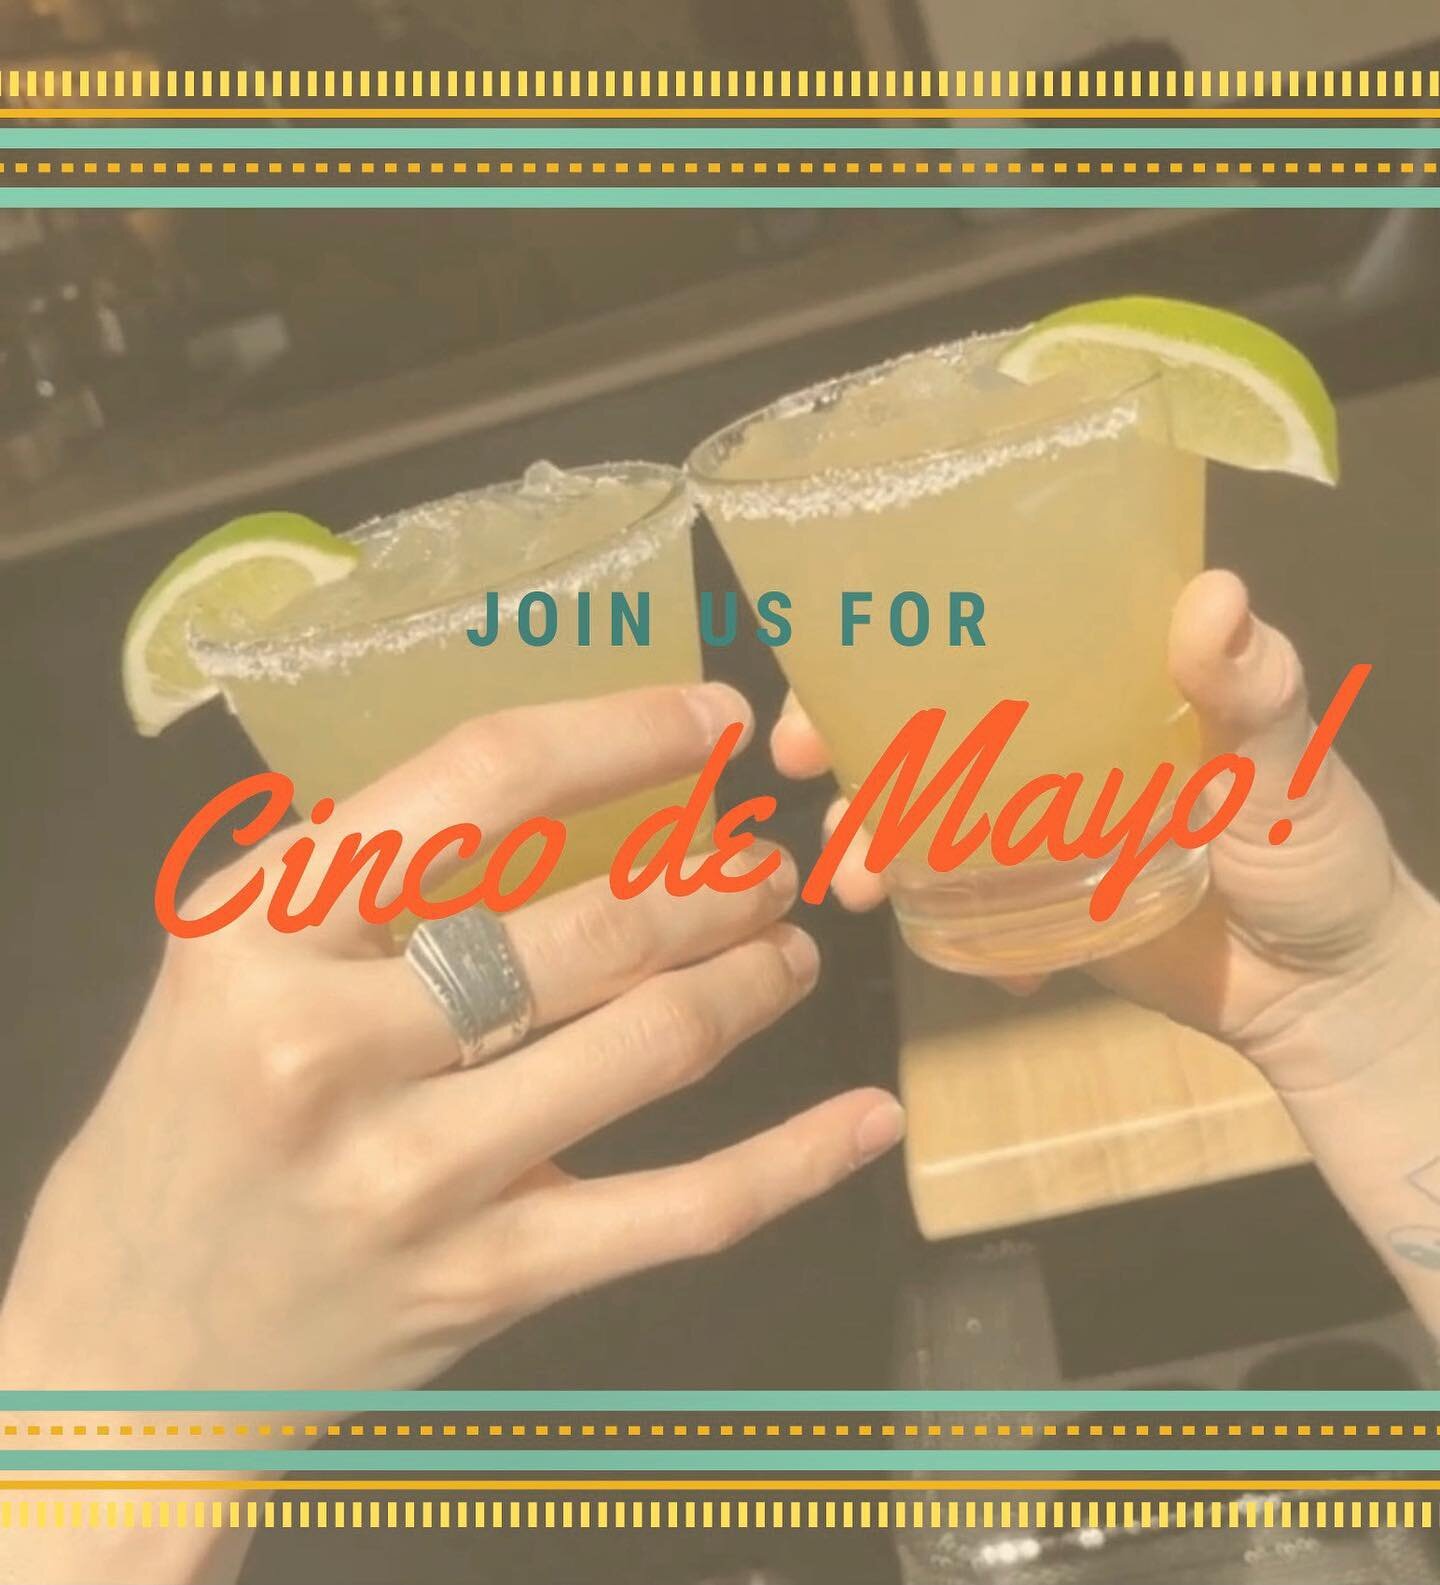 Cinco de Mayo is tomorrow friends! Get your reservations in now &amp; join us for margaritas 🍹 
Happy hour from 3-5!